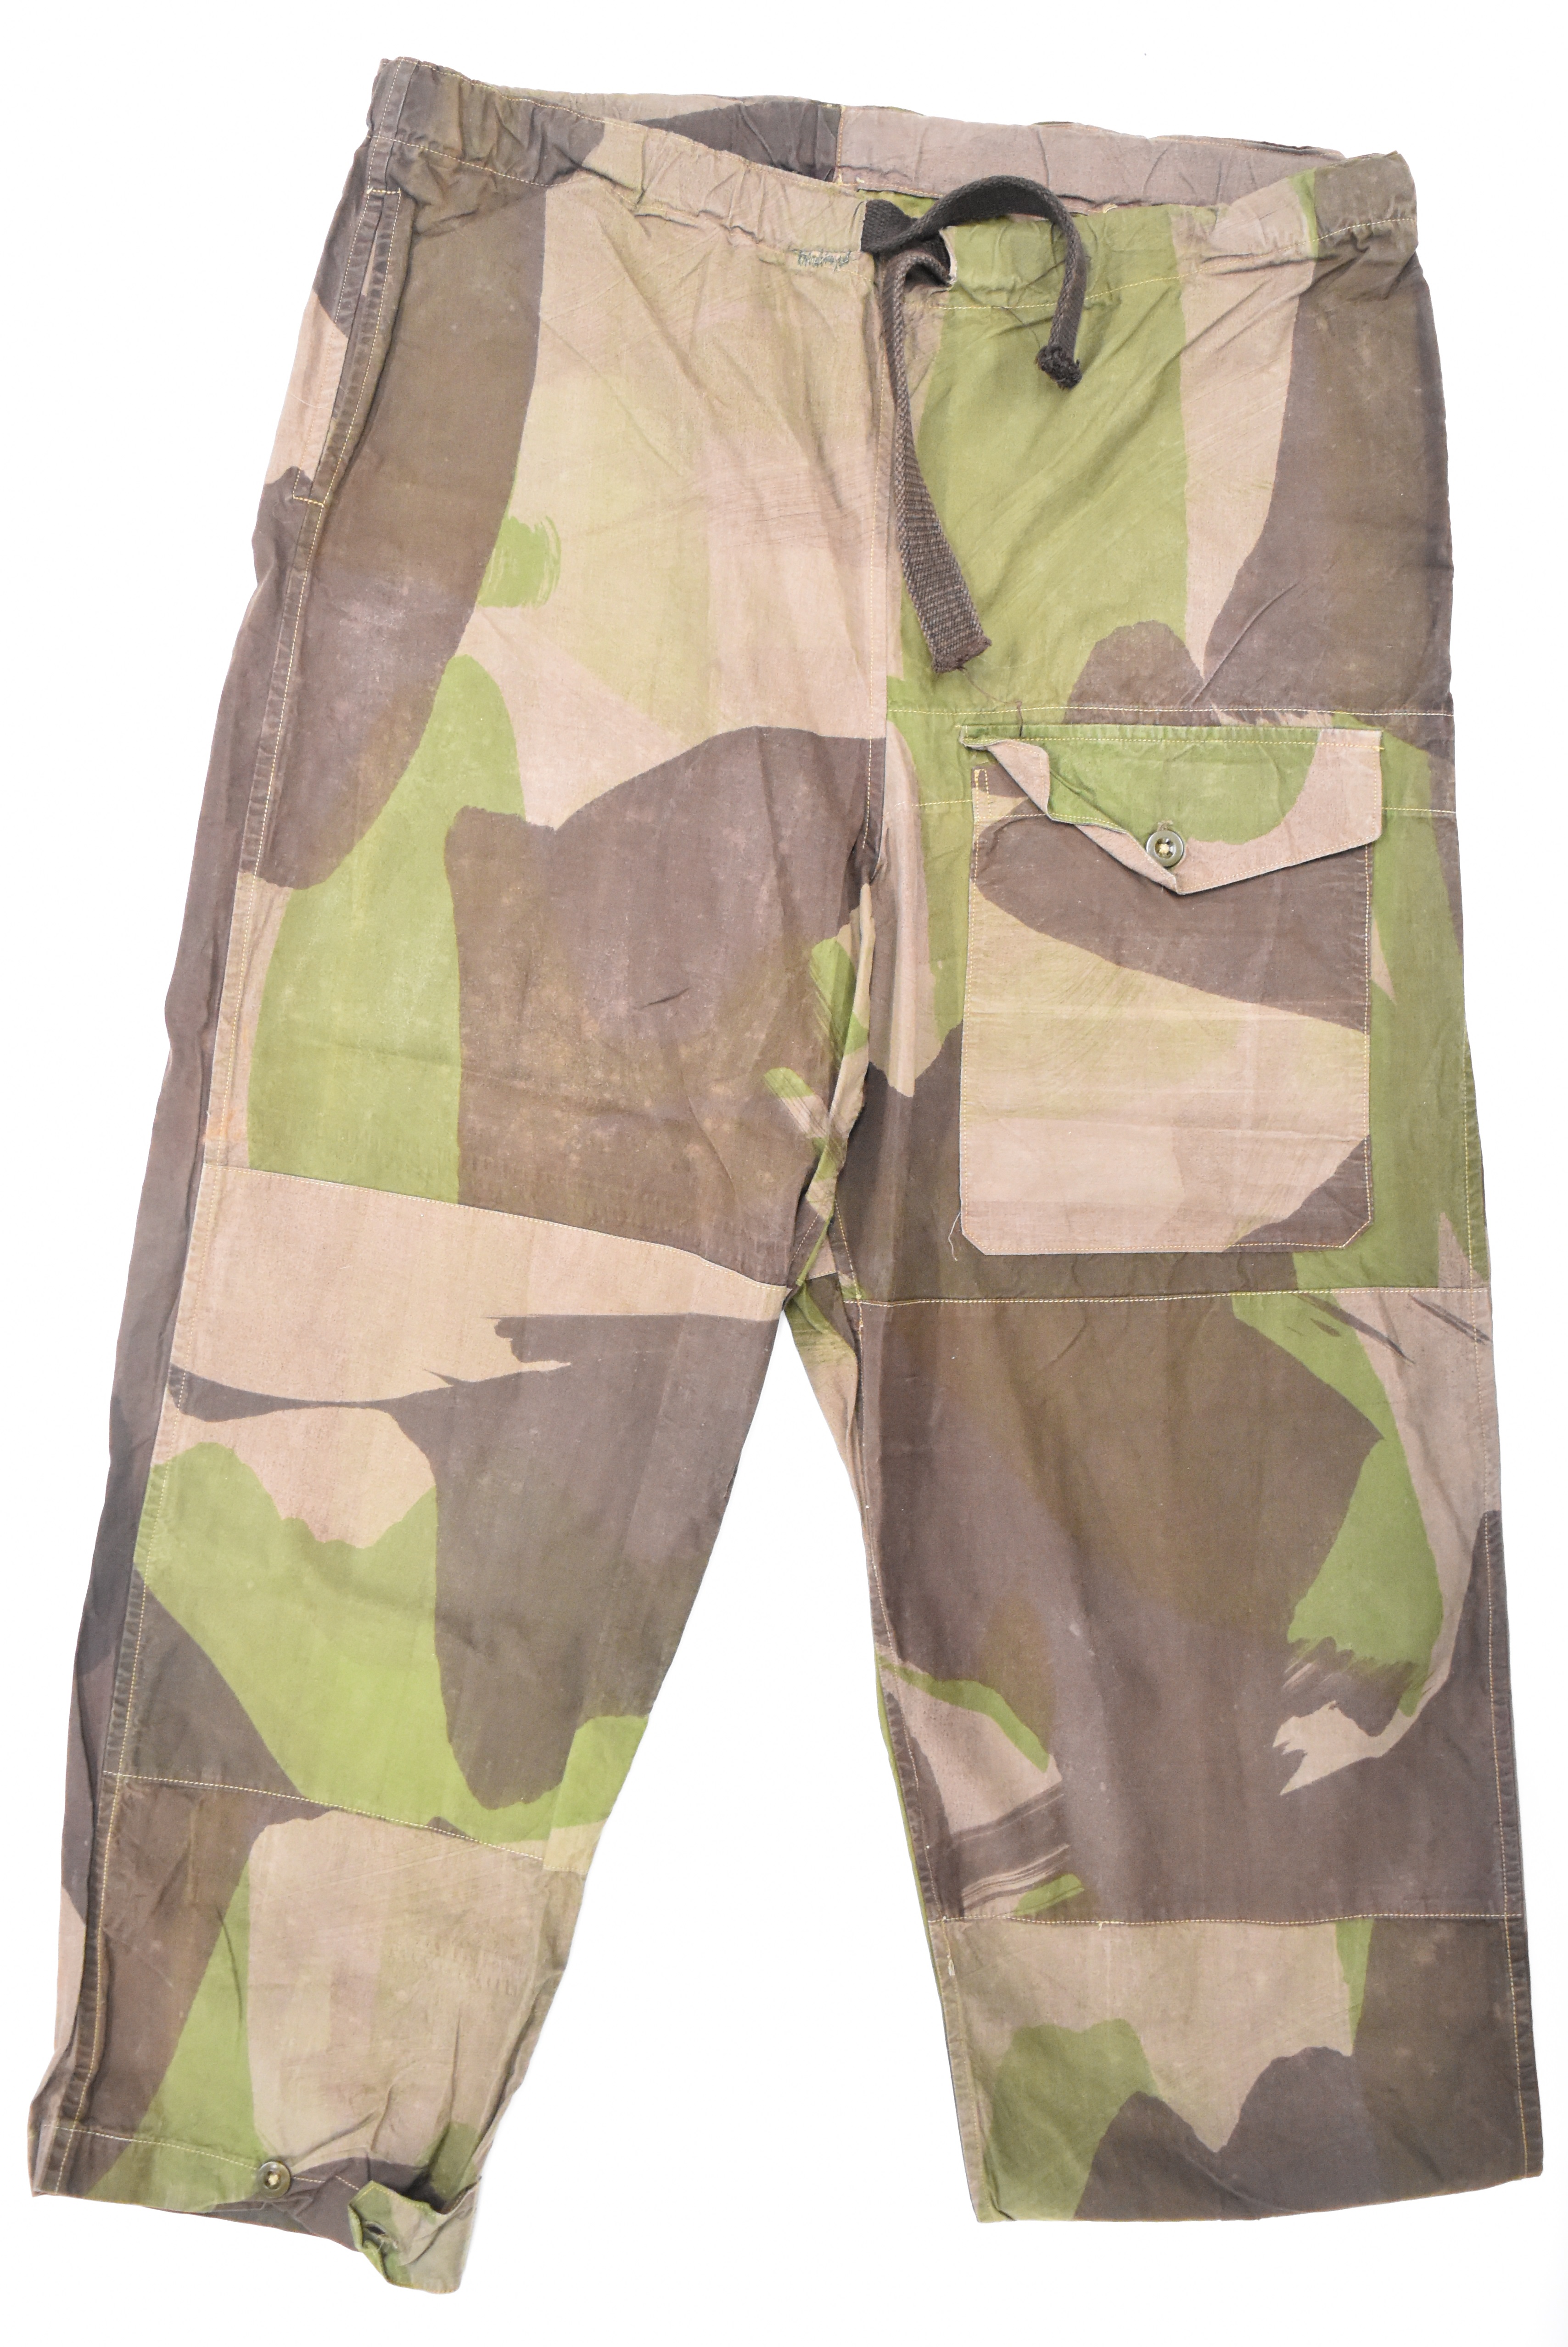 British WW2 SAS windproof camouflage trousers with single front pocket, cloth ties, external label - Image 4 of 6